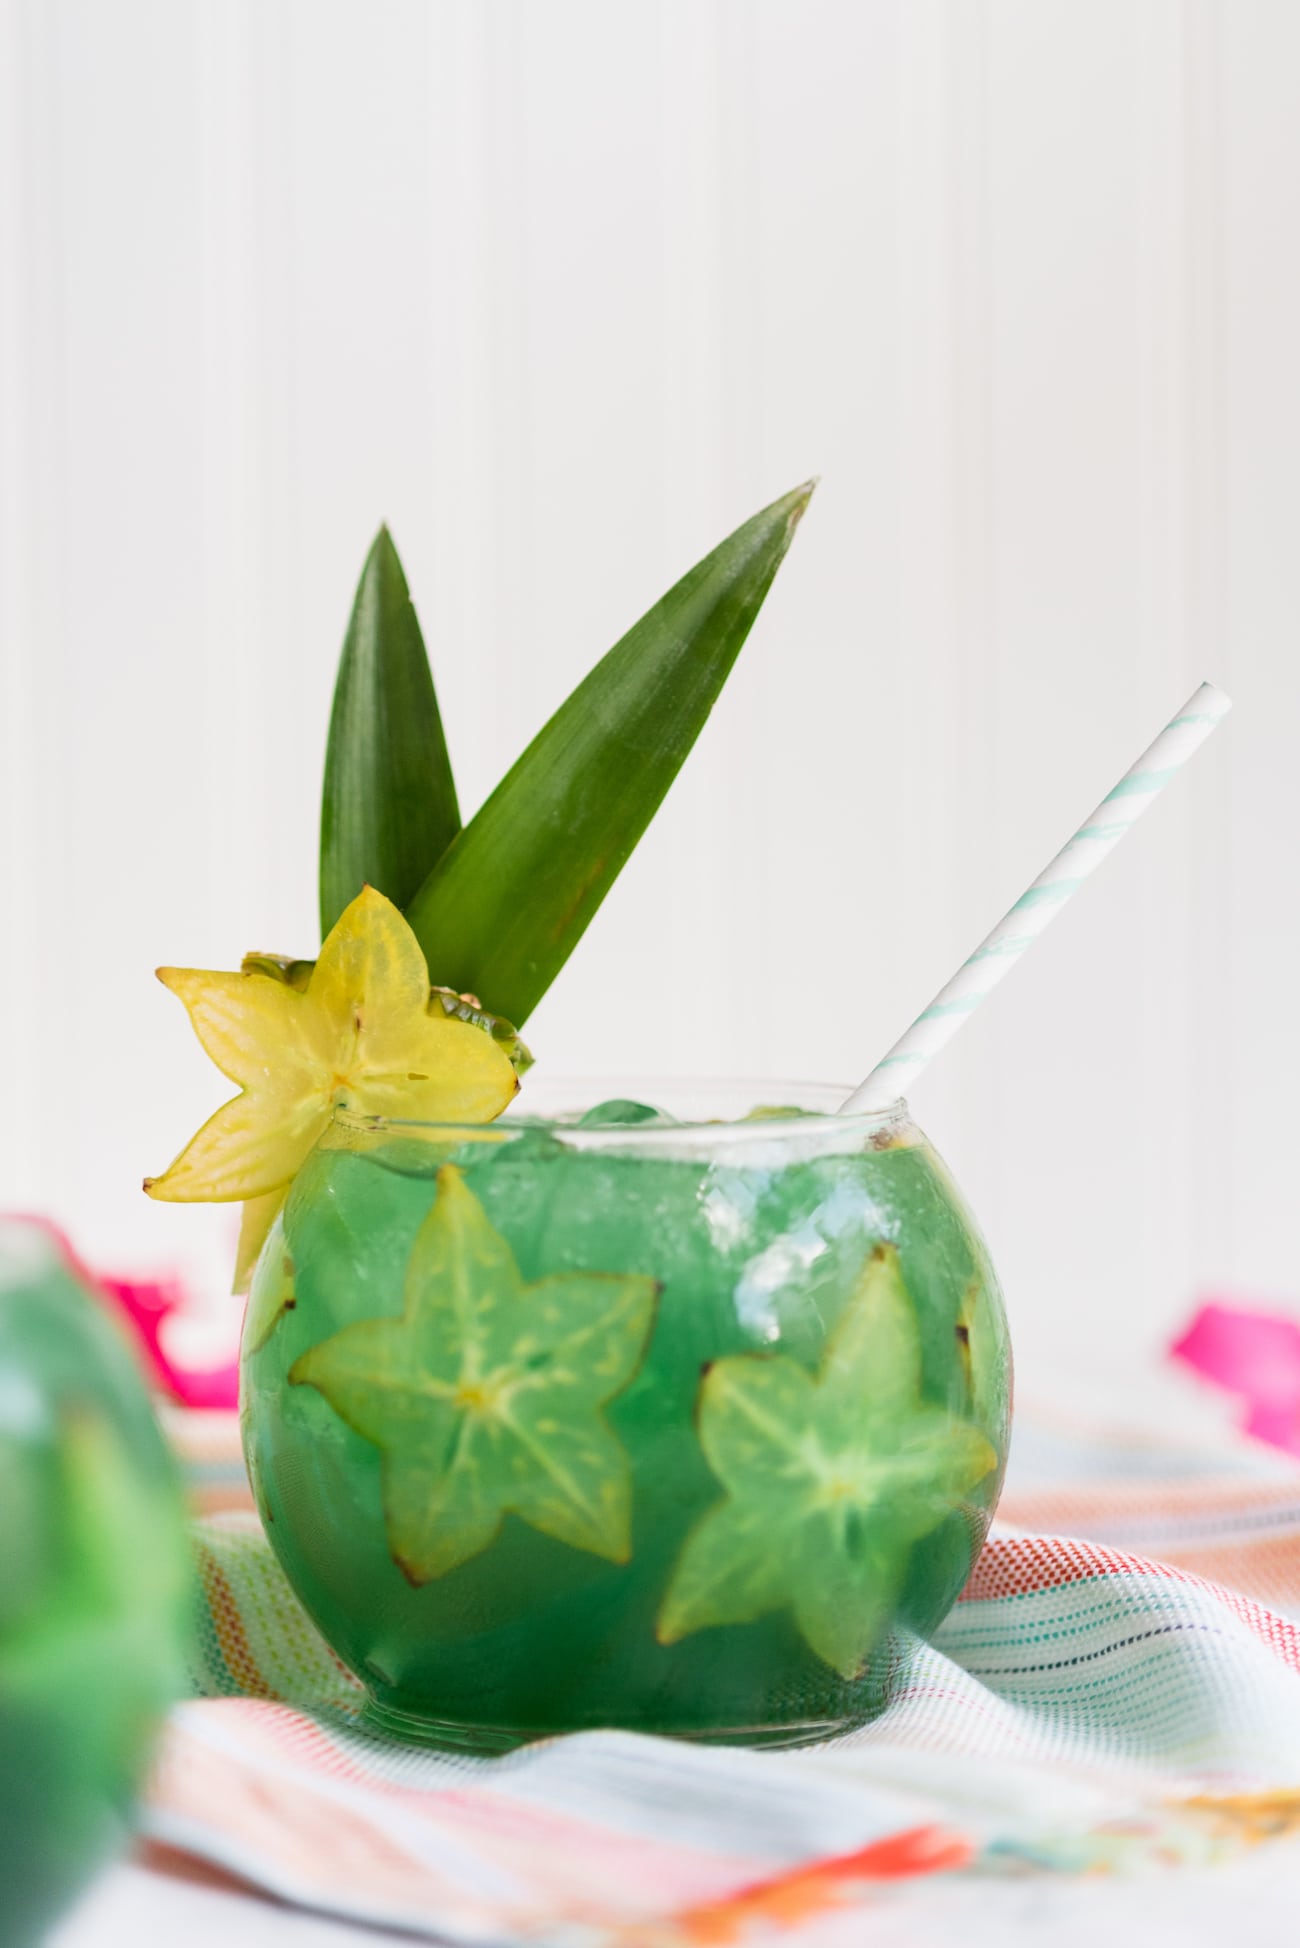 Mermaid Water Fish Bowl Drinks | Summer cocktail recipes, summer party ideas, recipes and more from entertaining blog @cydconverse